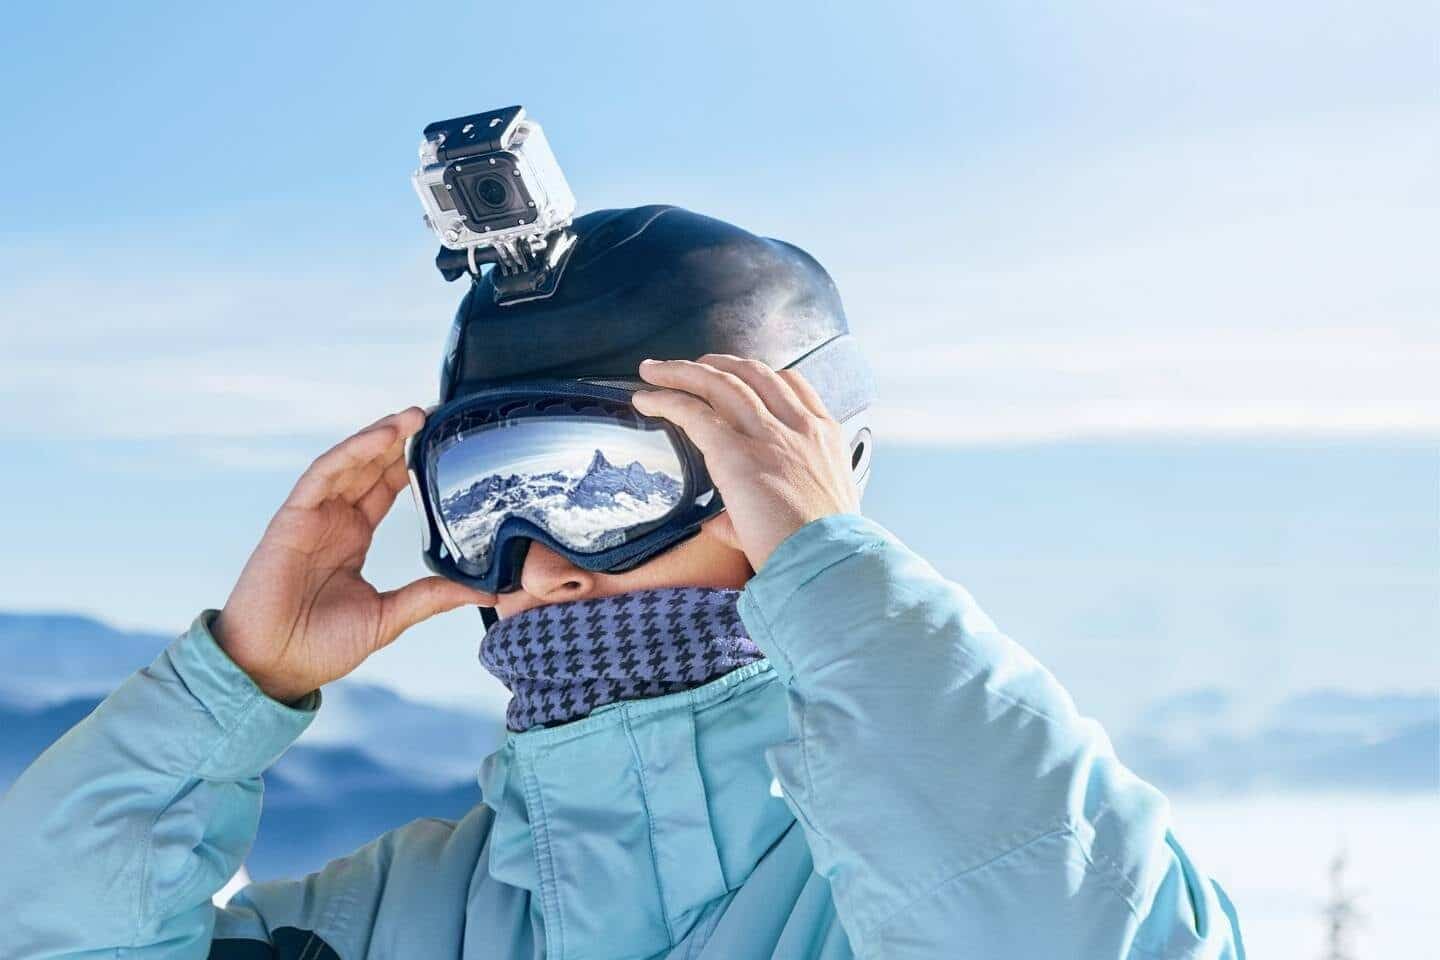 Skier with action camera on a helmet